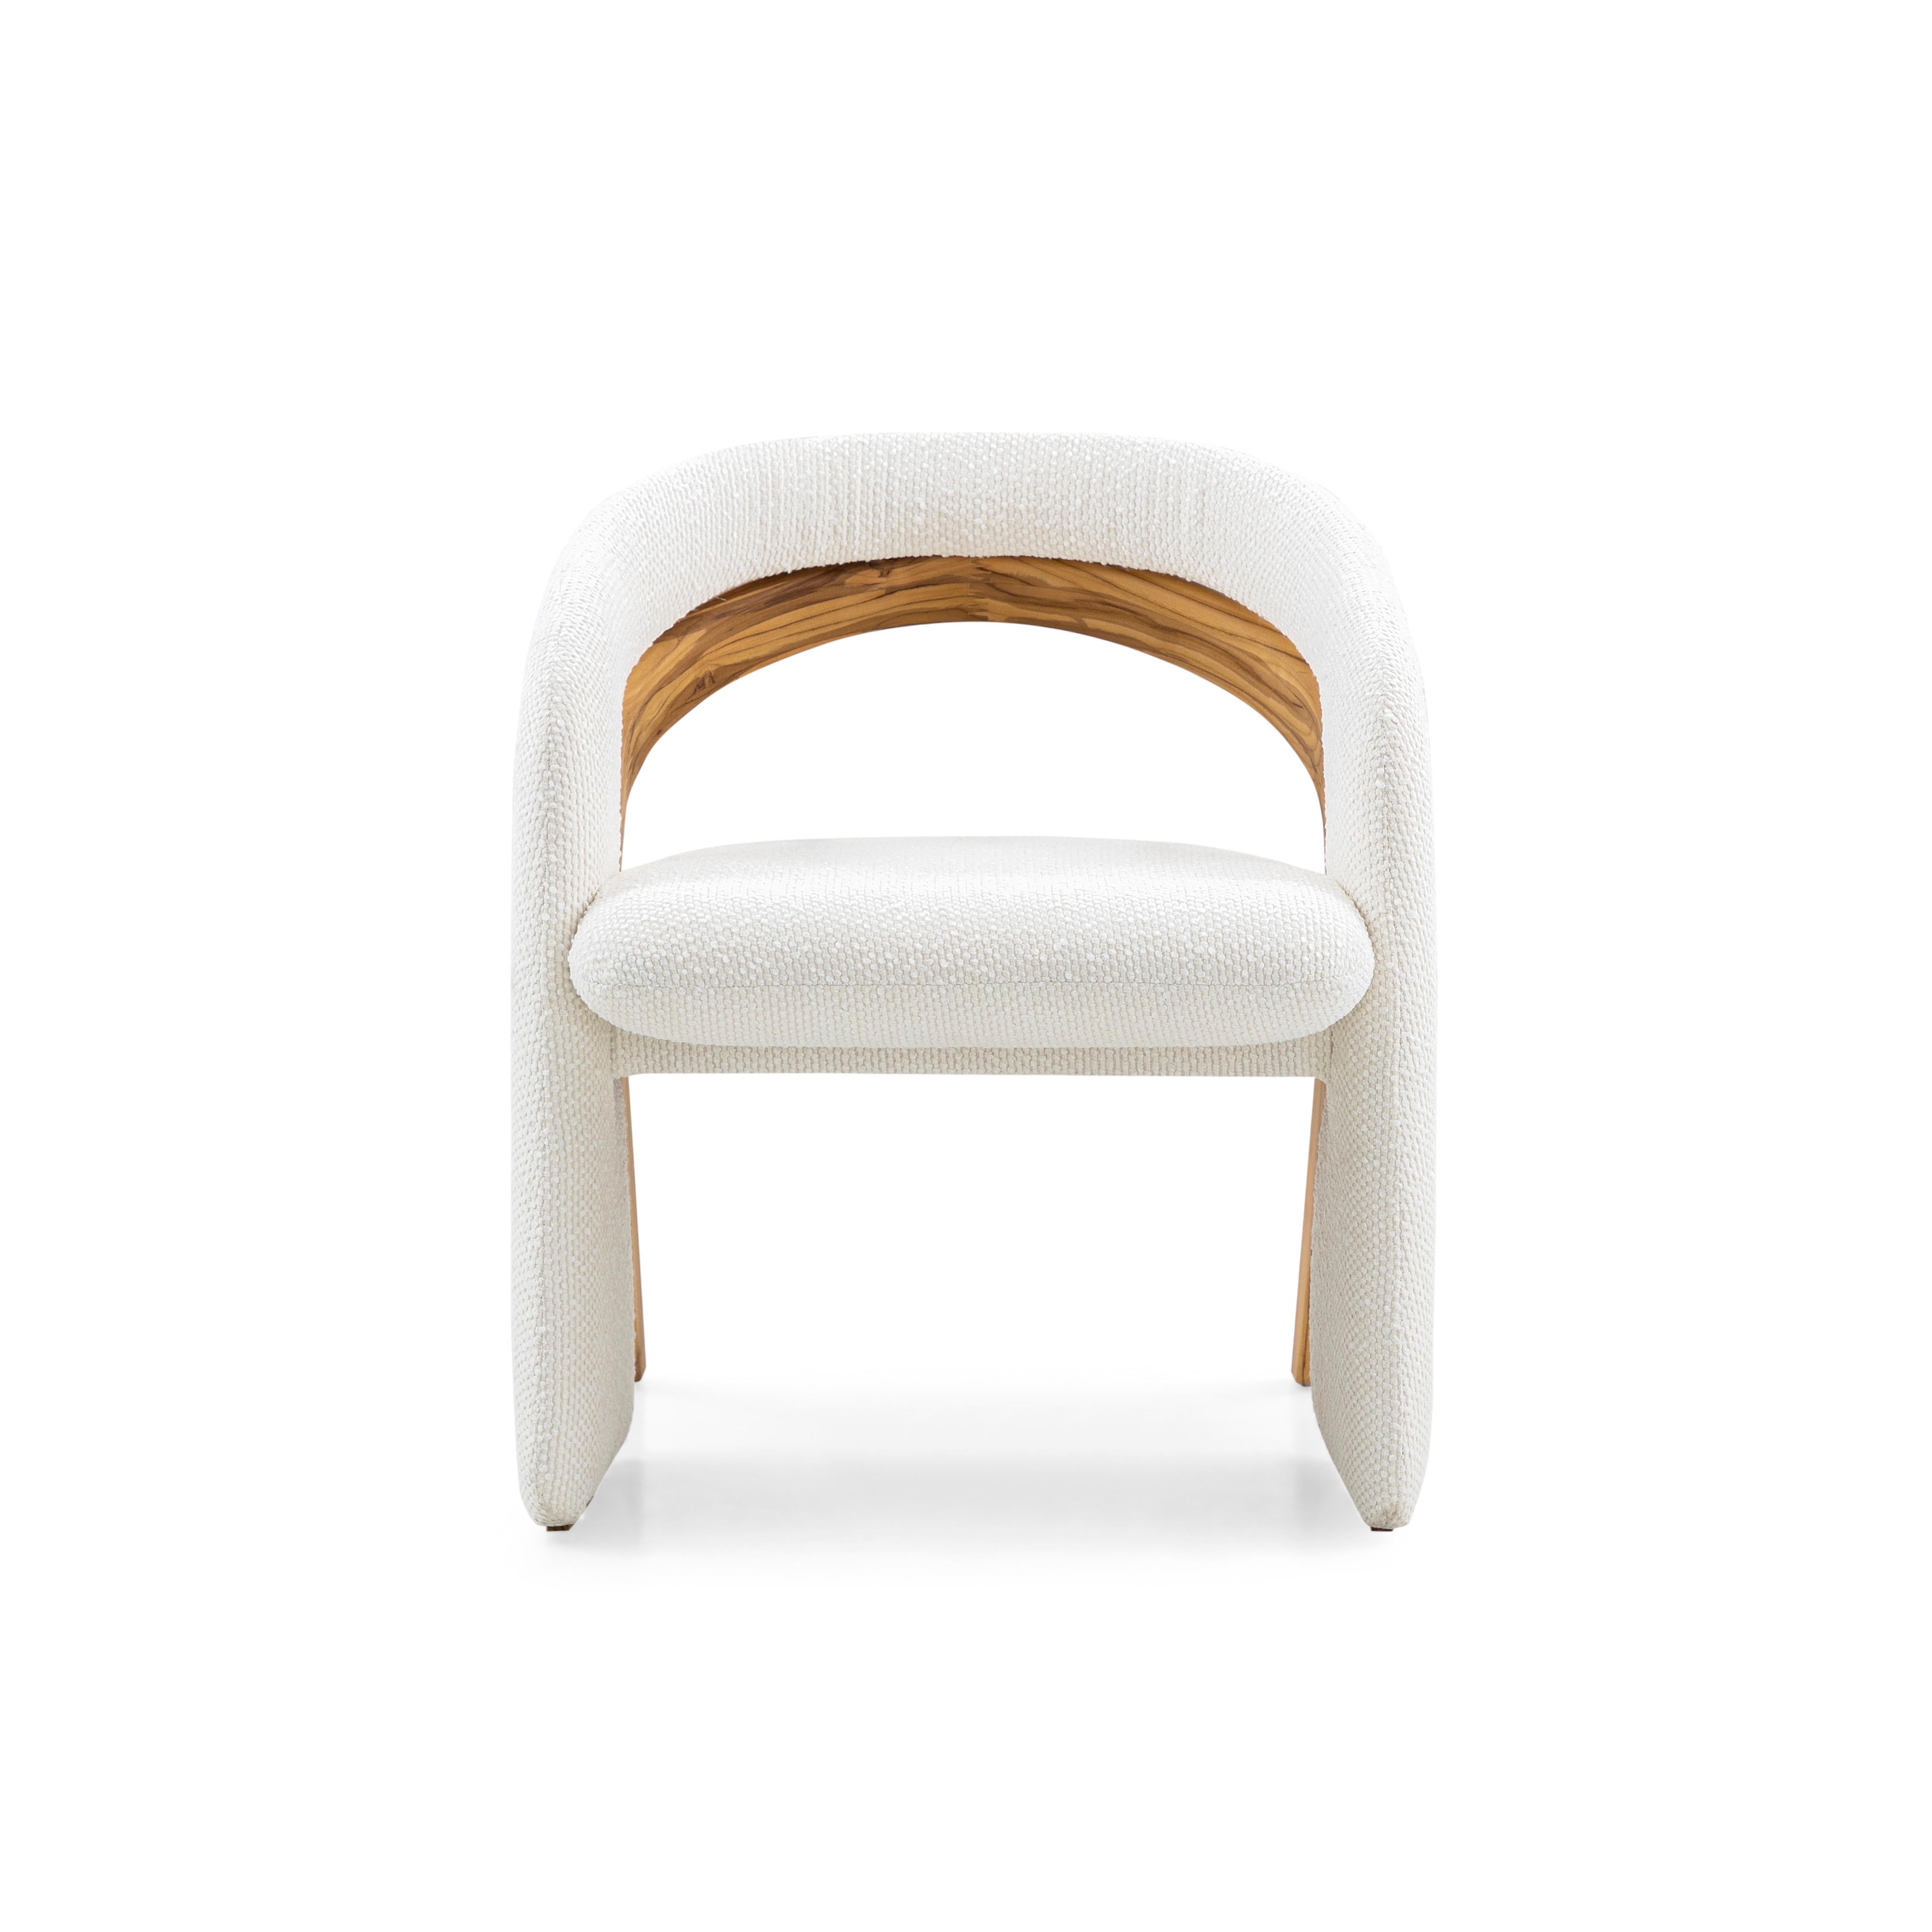 Olga Dining Chair in Teak Wood Finish and White Bouclé In New Condition For Sale In Miami, FL